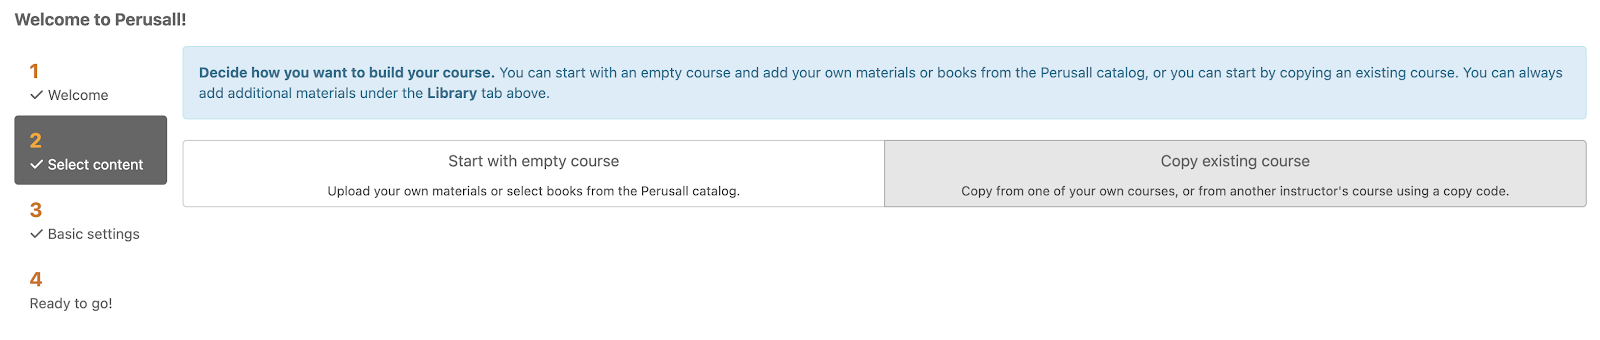 Left side of onboarding page with the second item on the left (Select content) highlighted